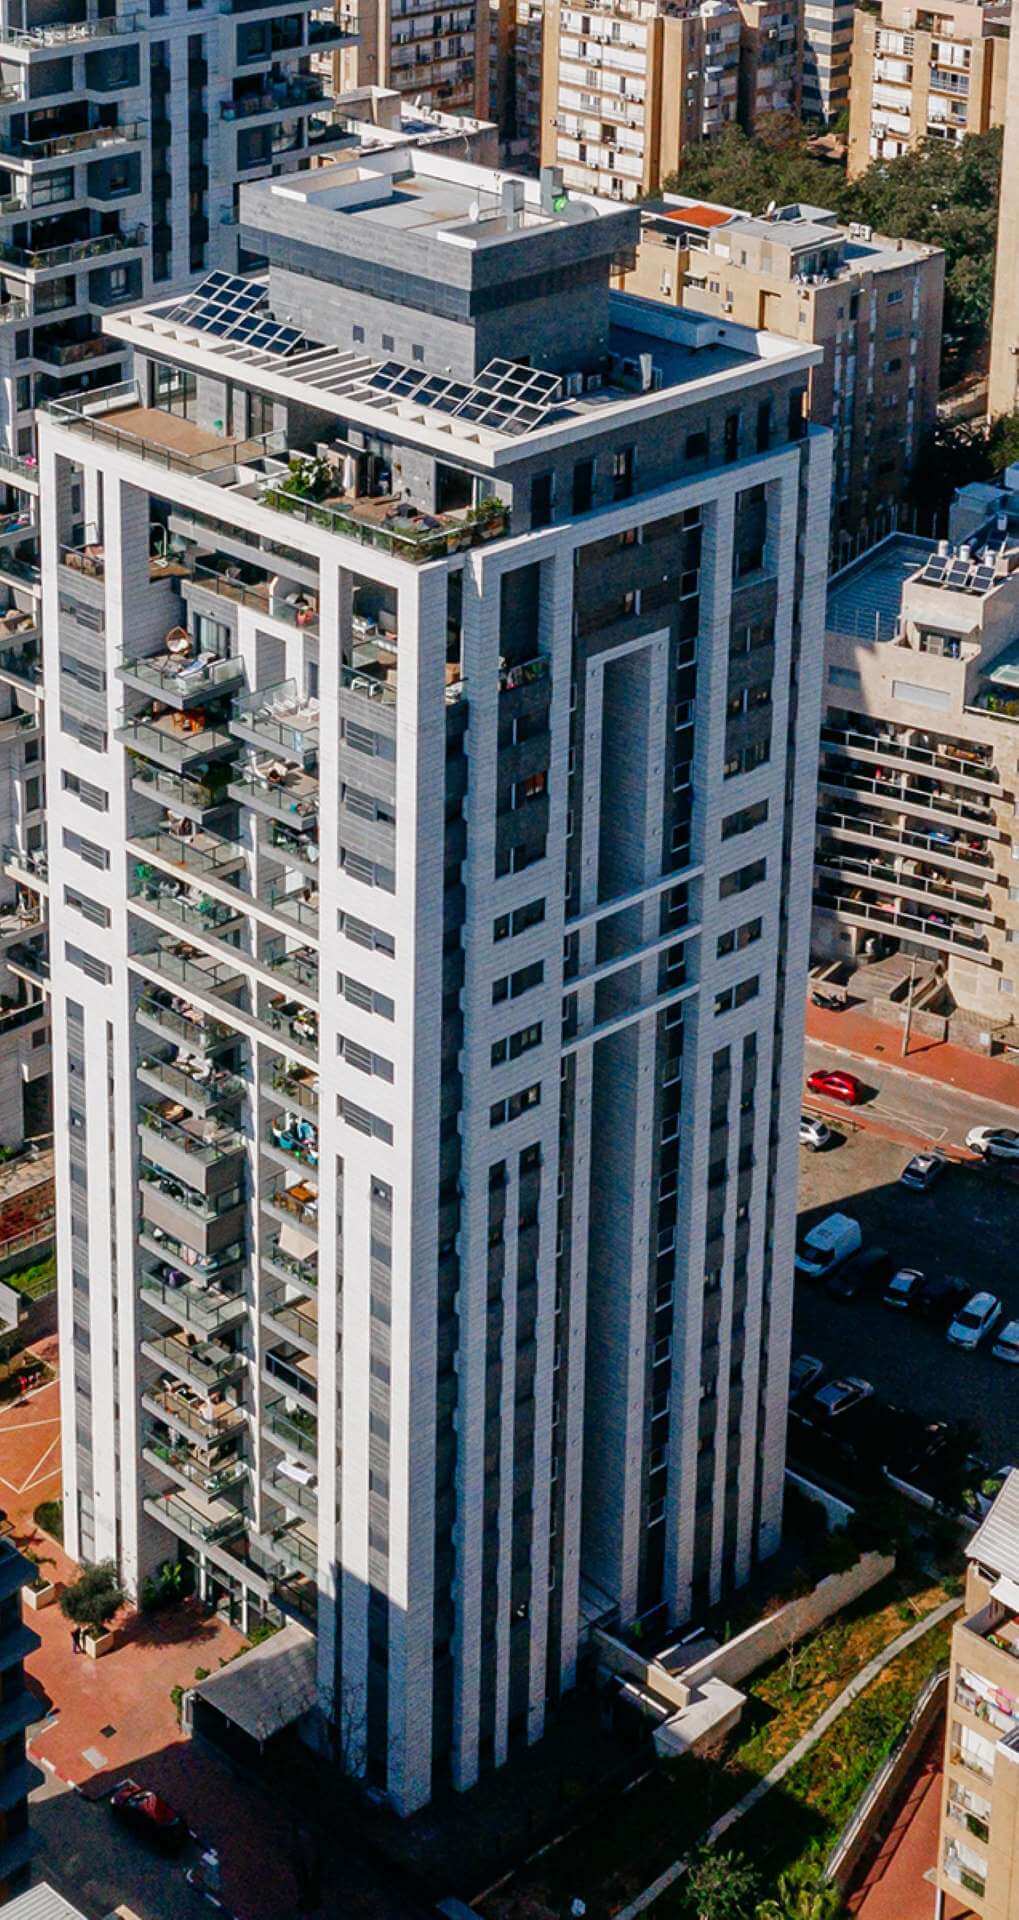 Photo of a building from the UNIK ALPHA project in Ramat Gan